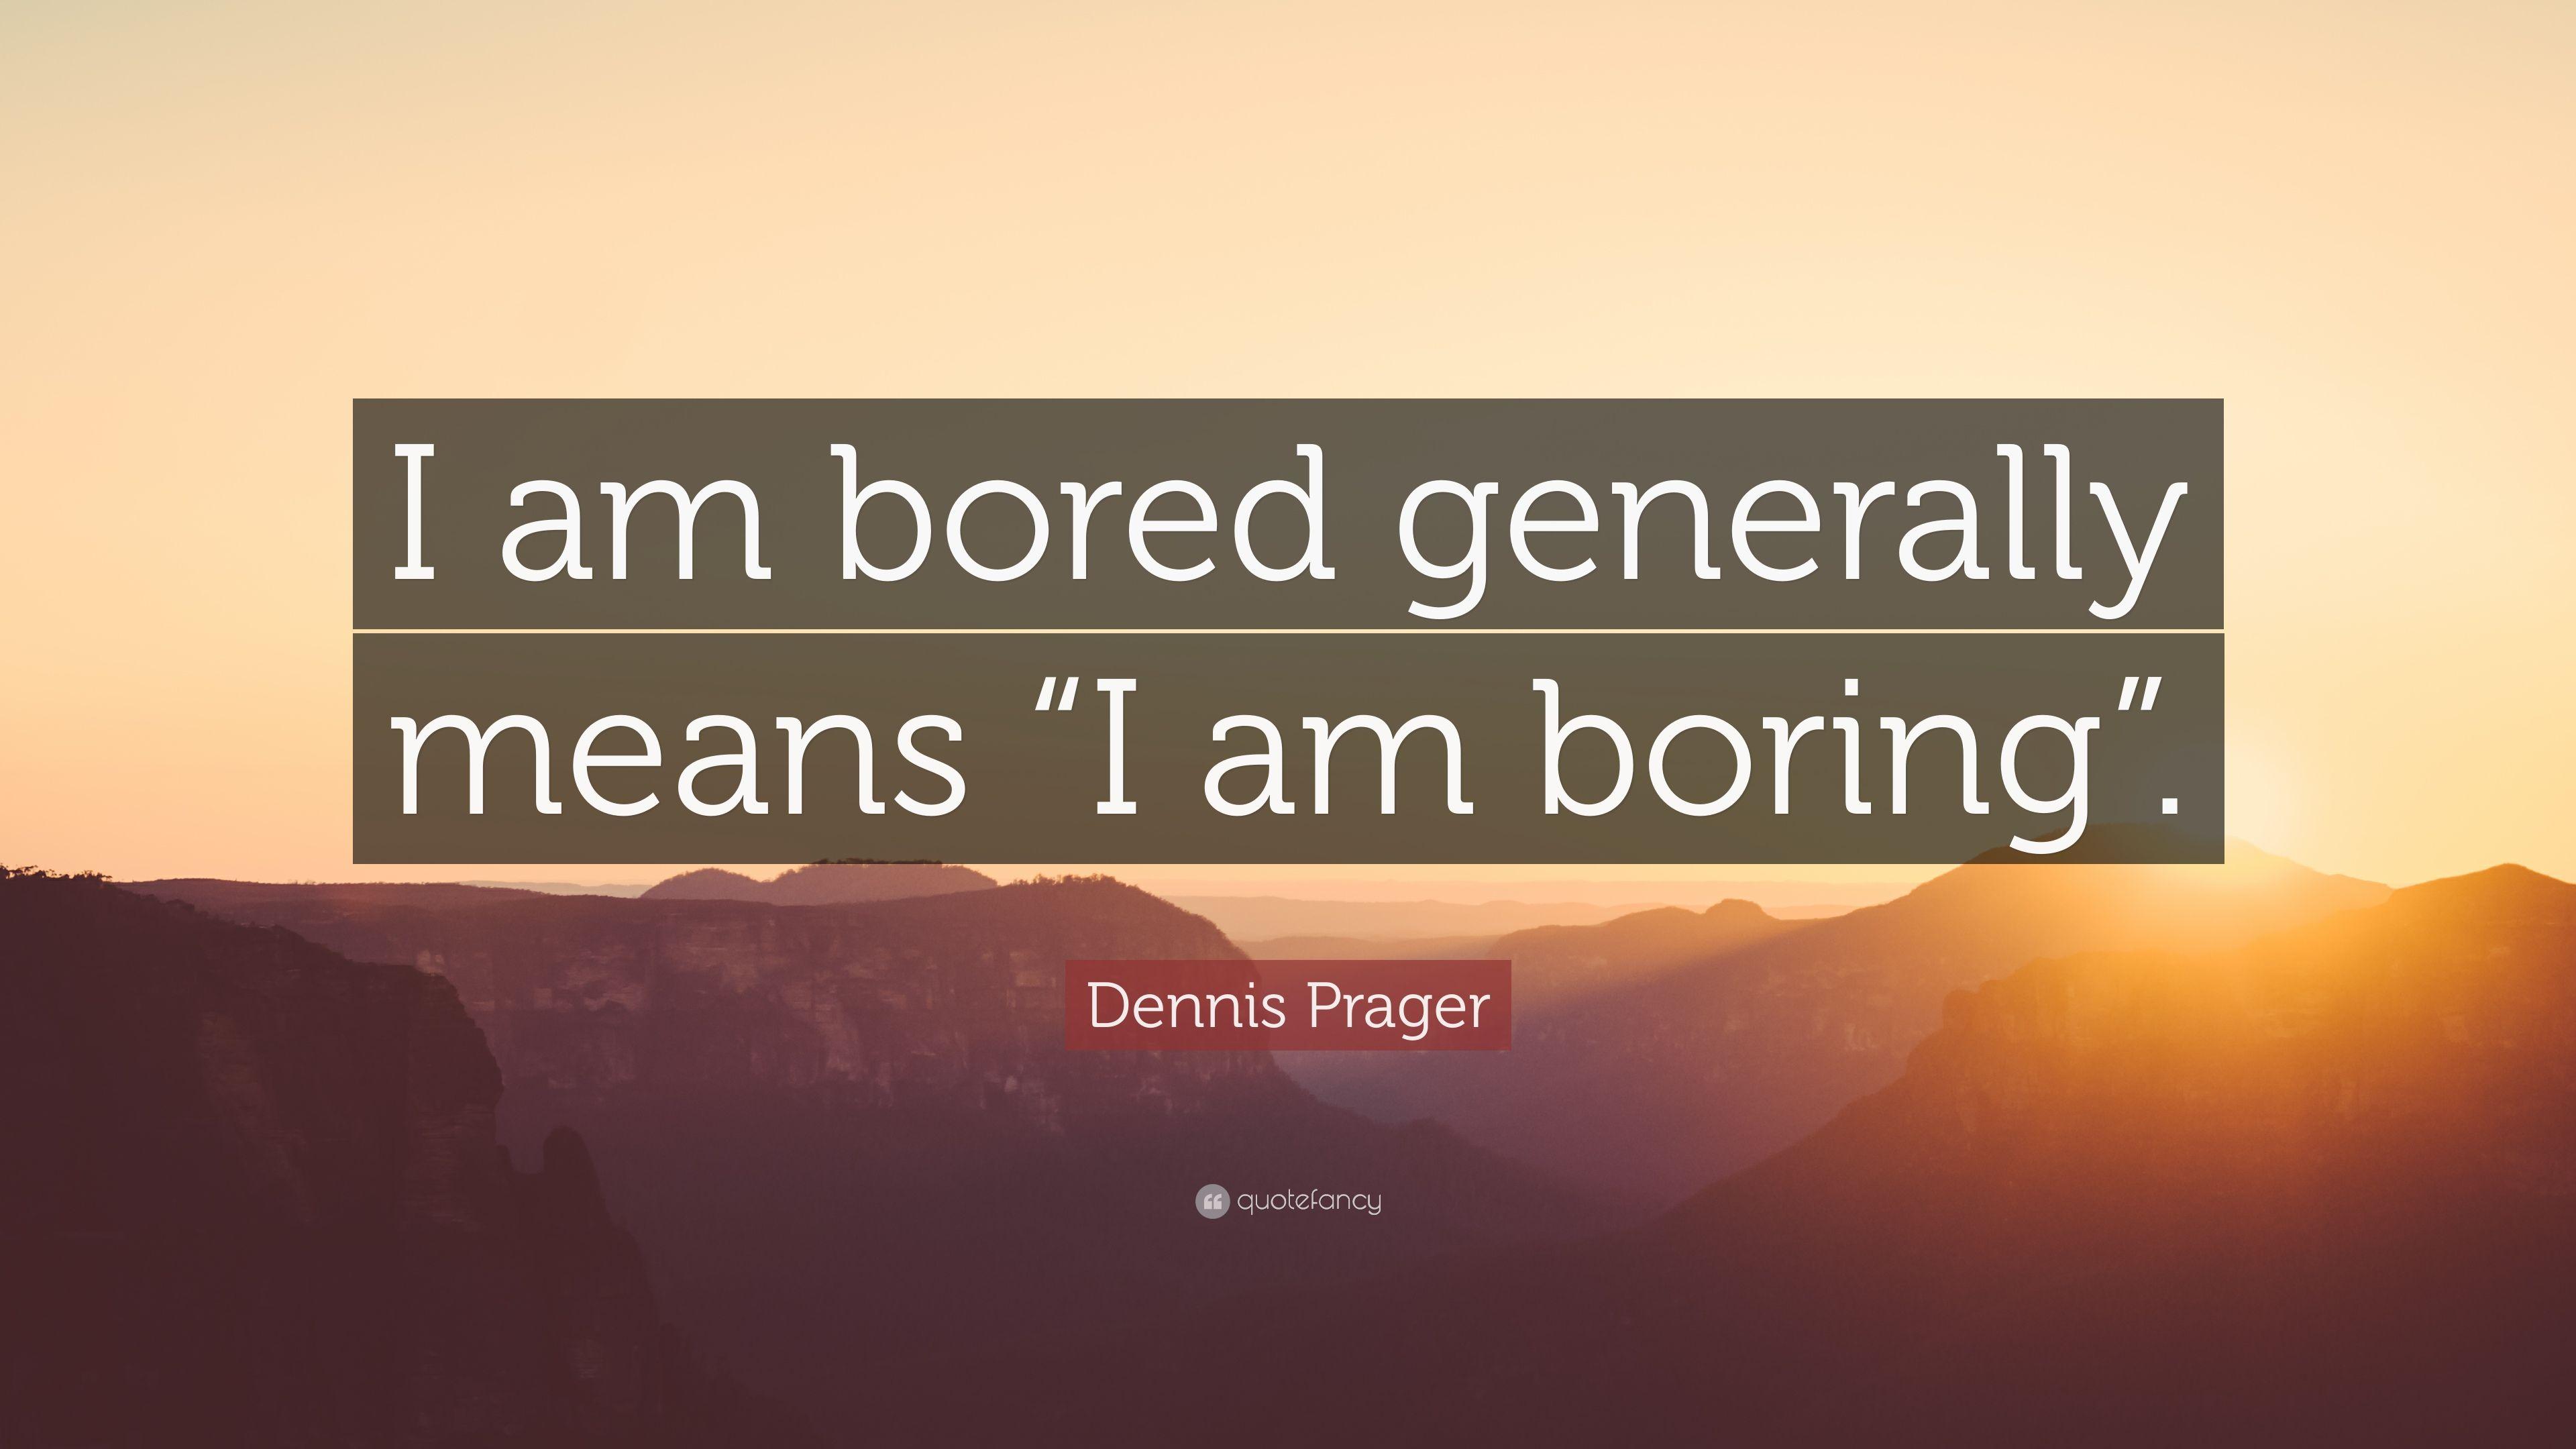 Dennis Prager Quote: "I am bored generally means "I am boring.